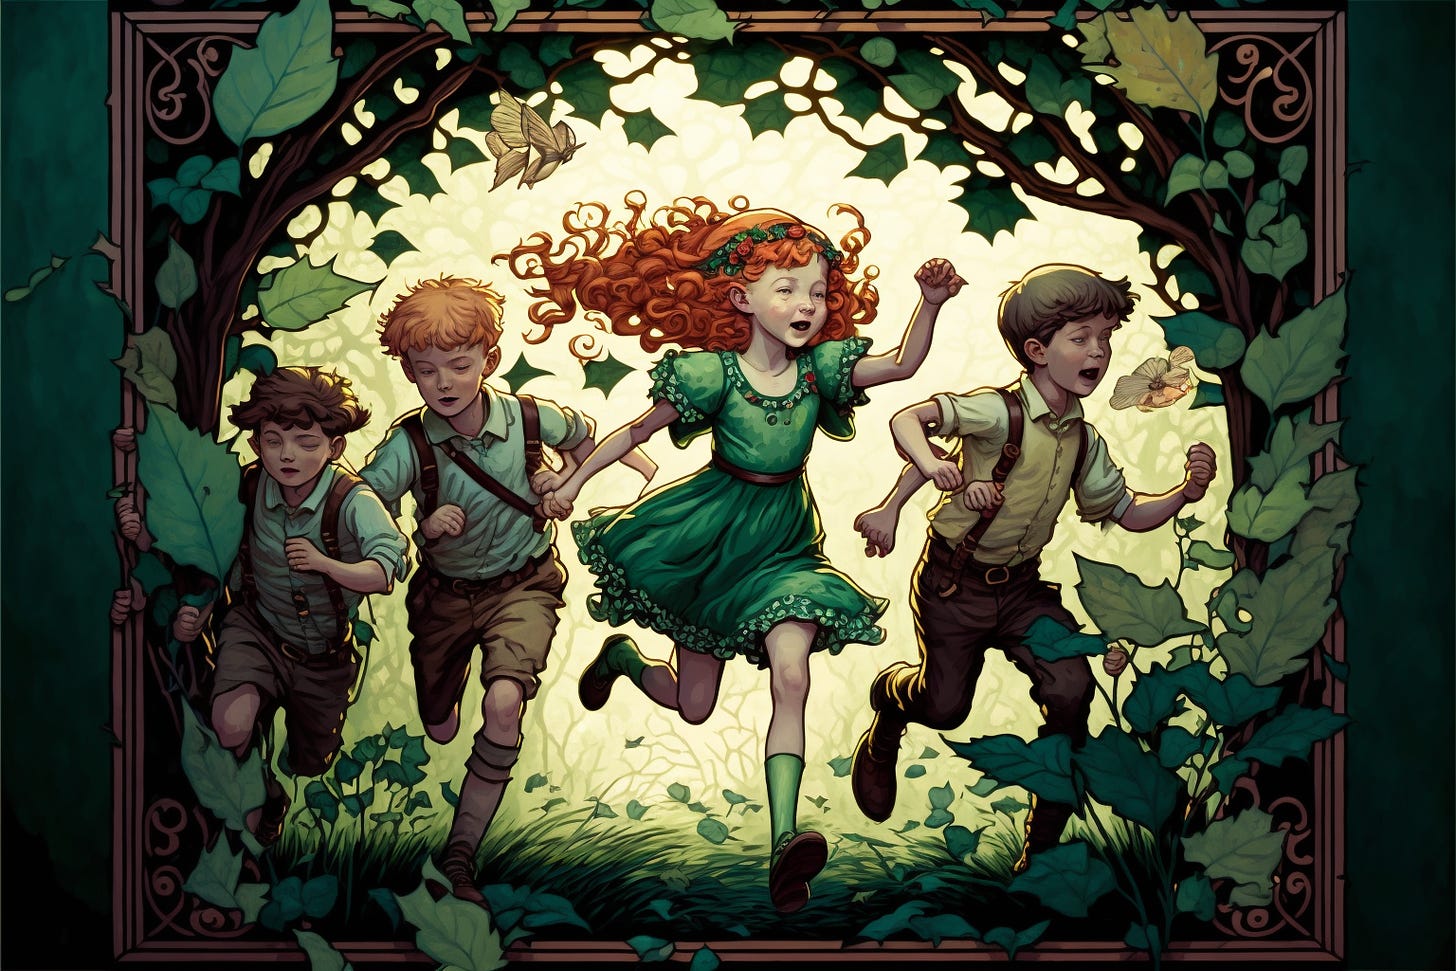 a group of young kids running around in a garden full of poison ivy